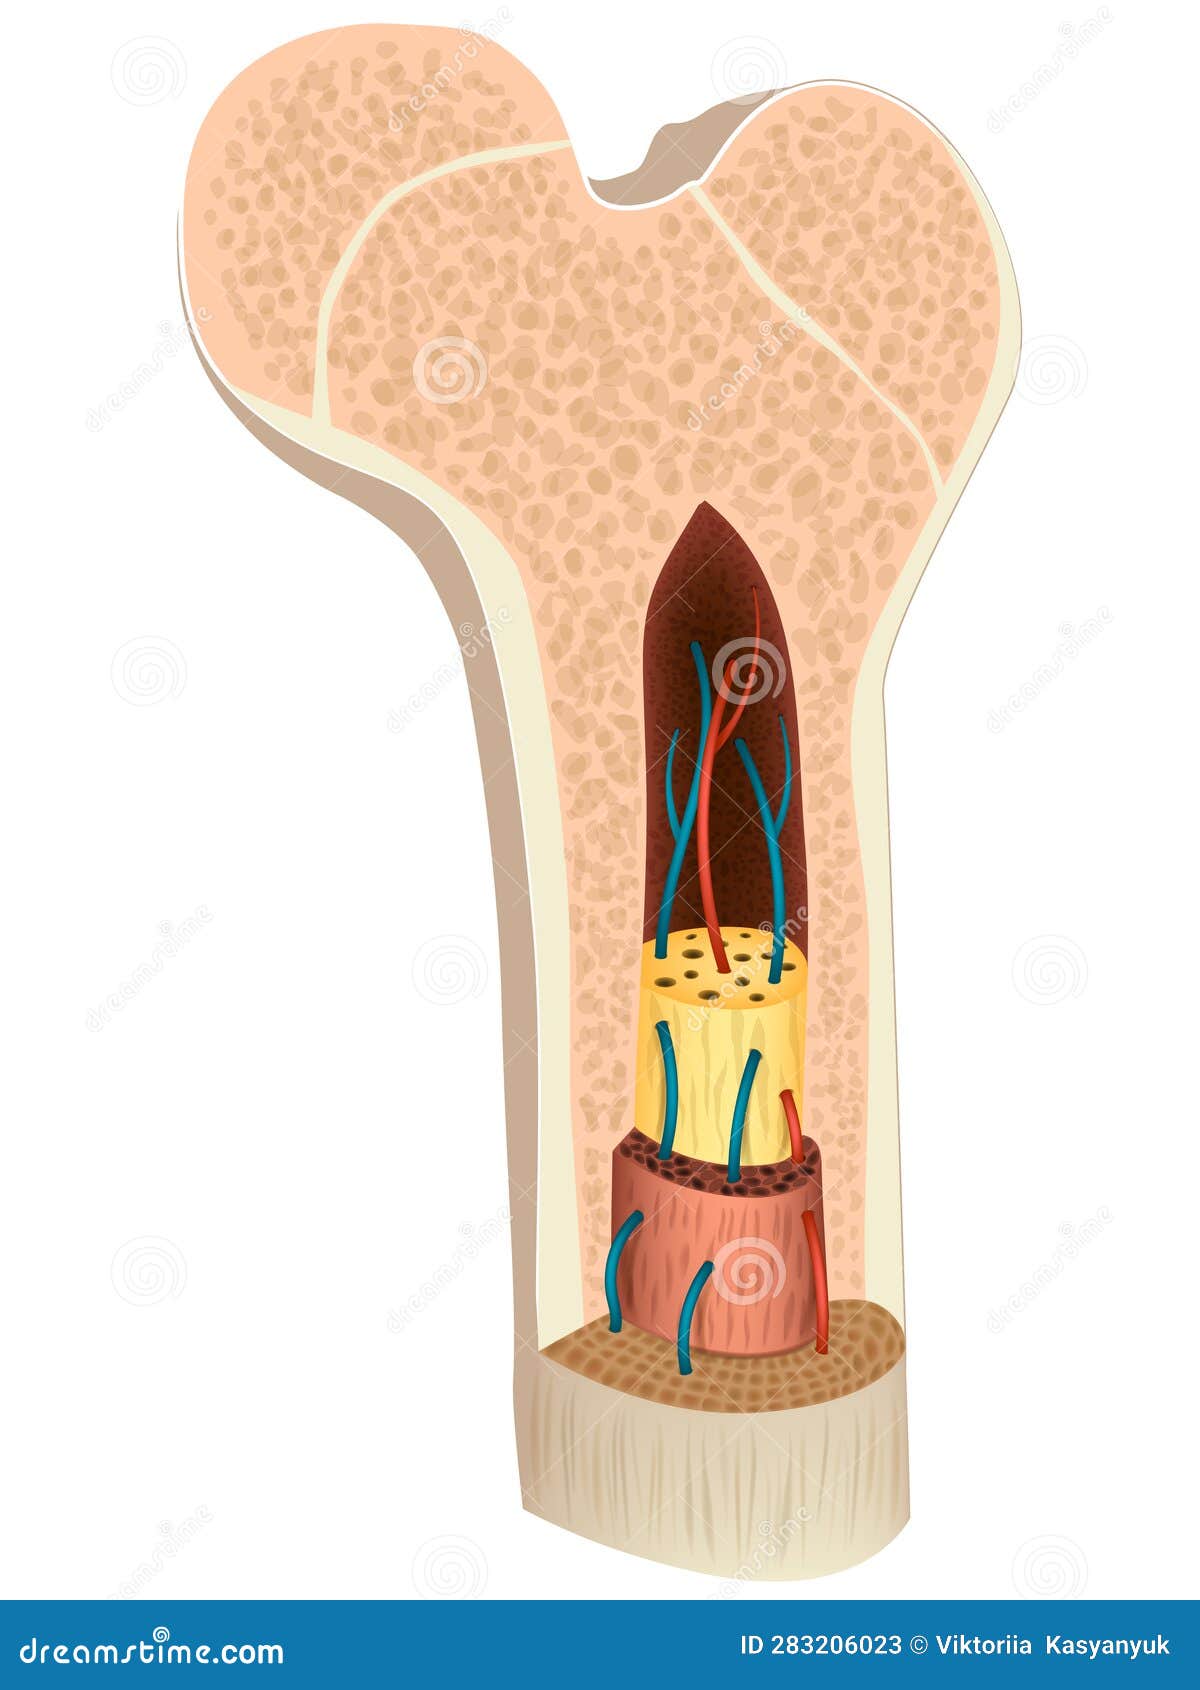 structure and composition of a long bone. diagram of cross section of a human bone showing bone marrow, spongy bone and